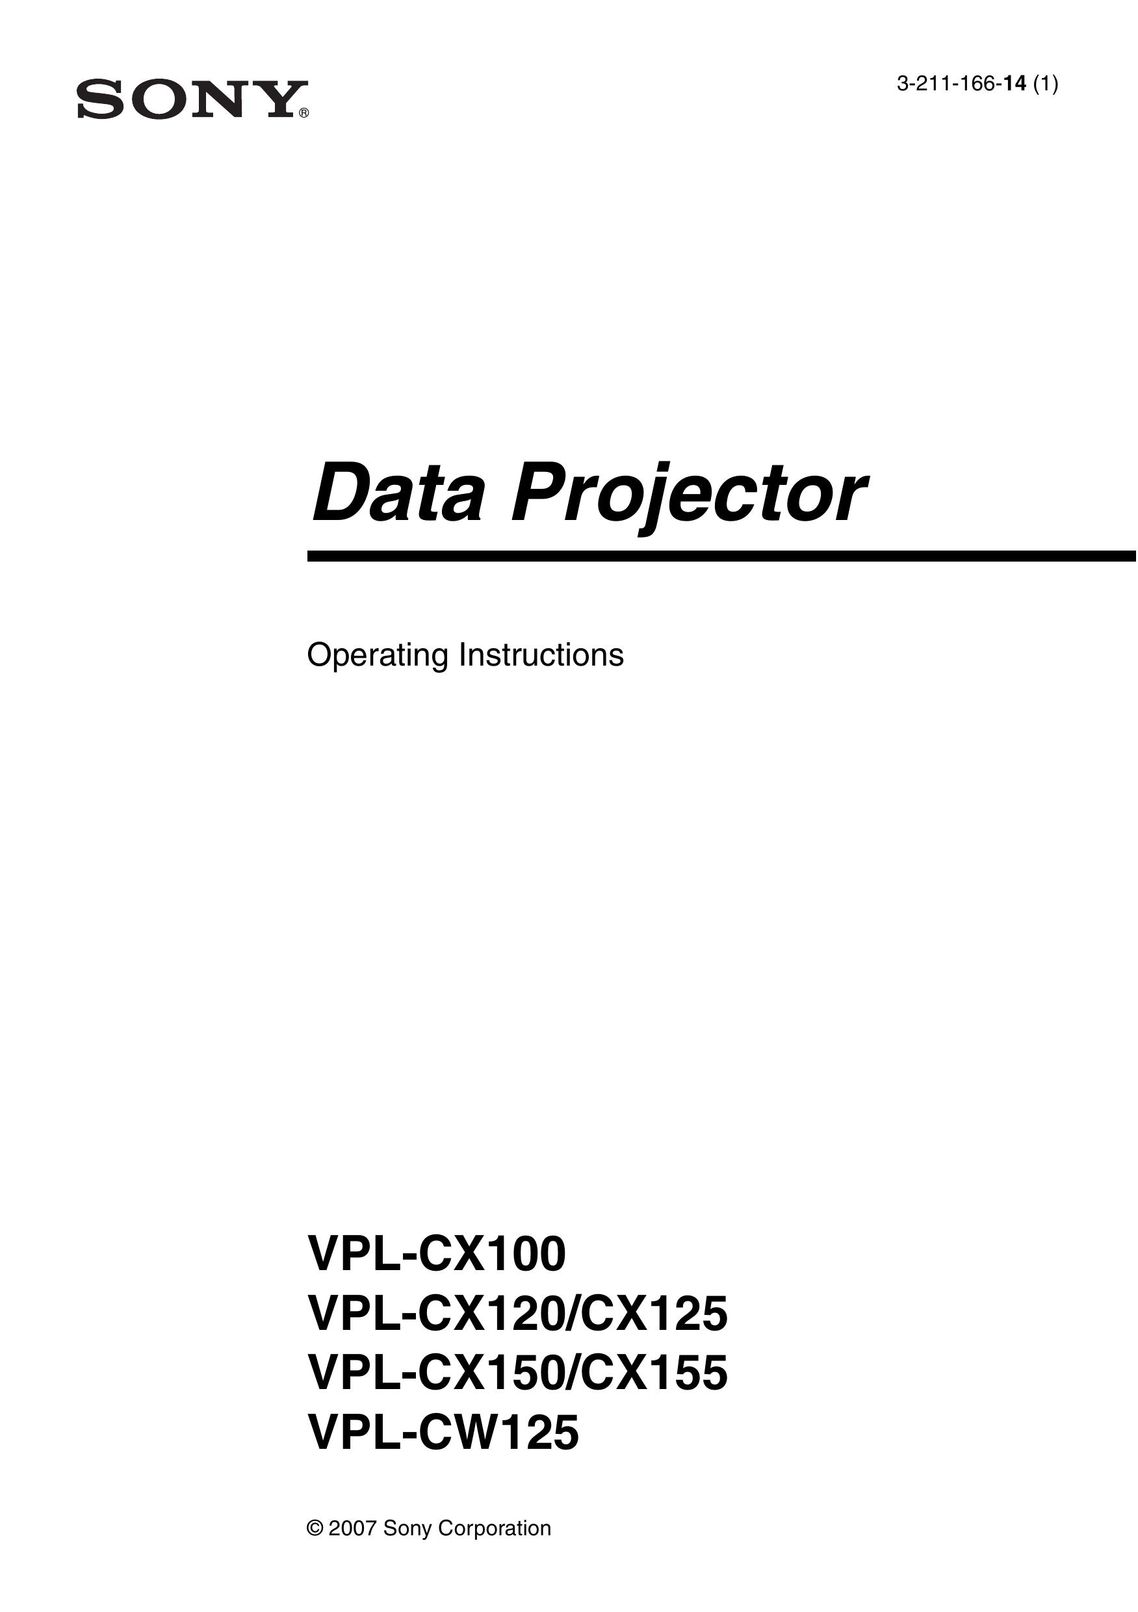 Sony CX125 Projector User Manual